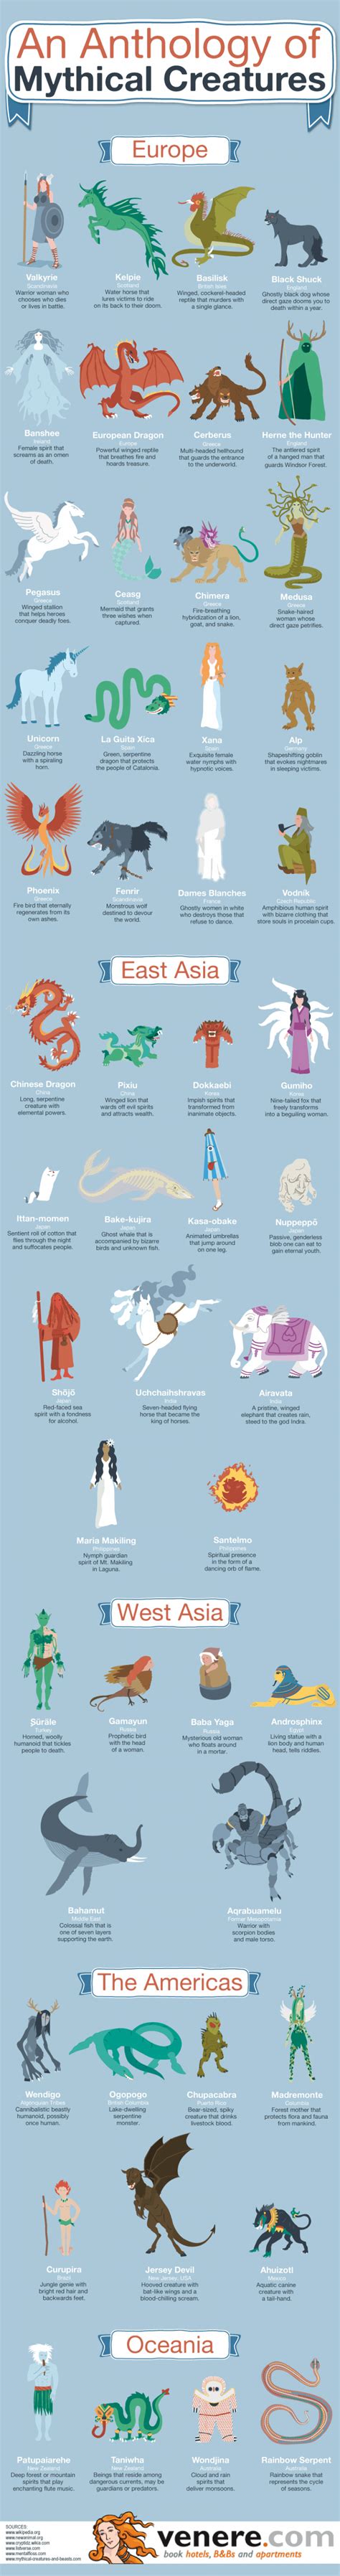 An Anthology Of Mythical Creatures Daily Infographic